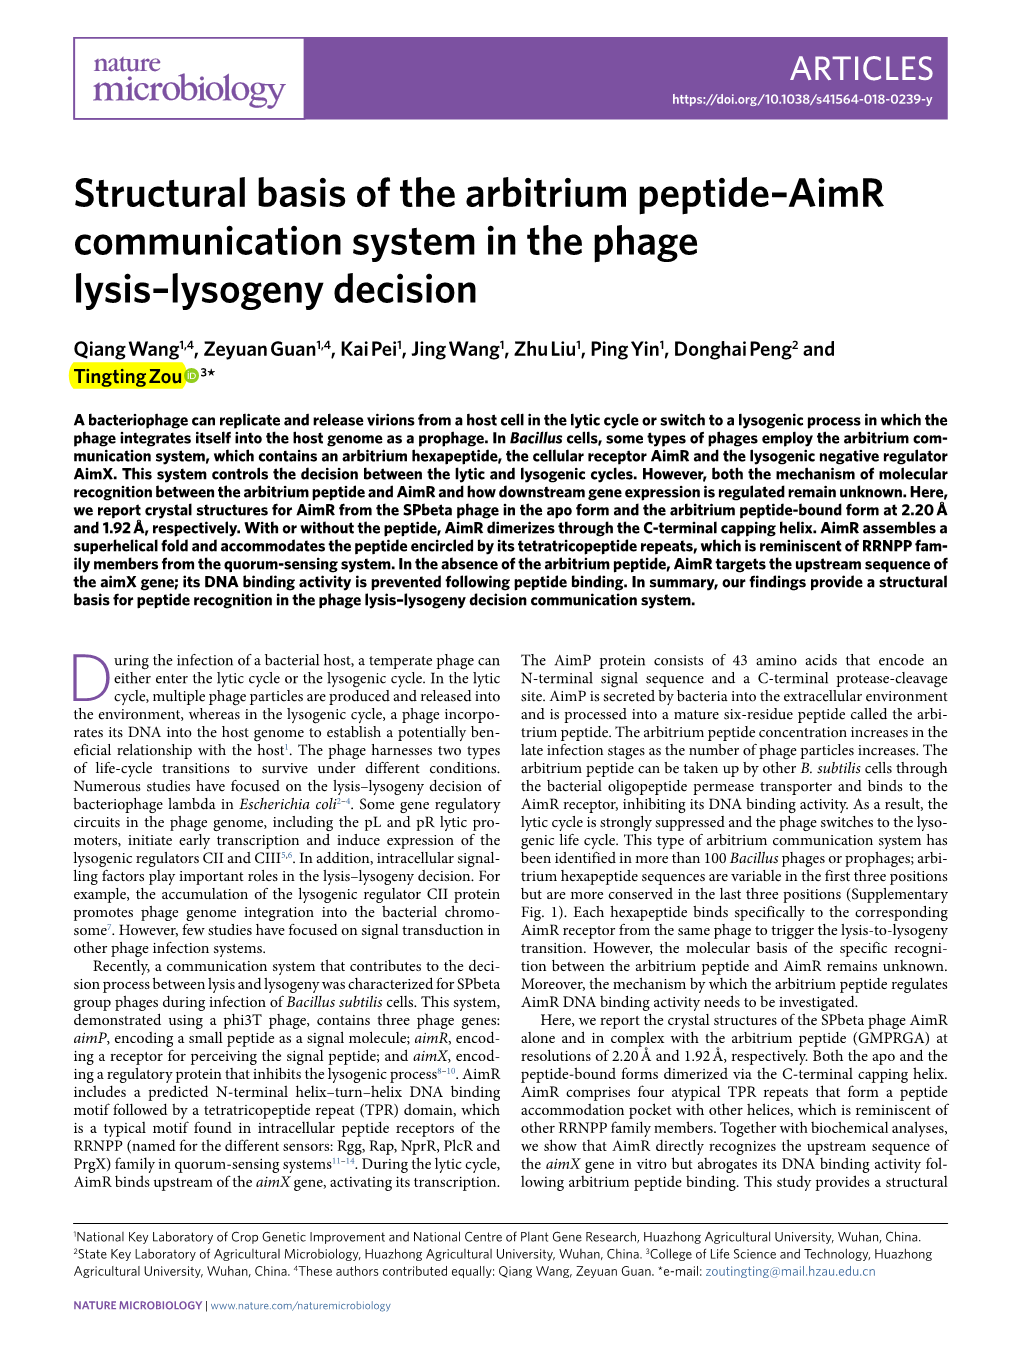 Structural Basis of the Arbitrium Peptide–Aimr Communication System in the Phage Lysis–Lysogeny Decision